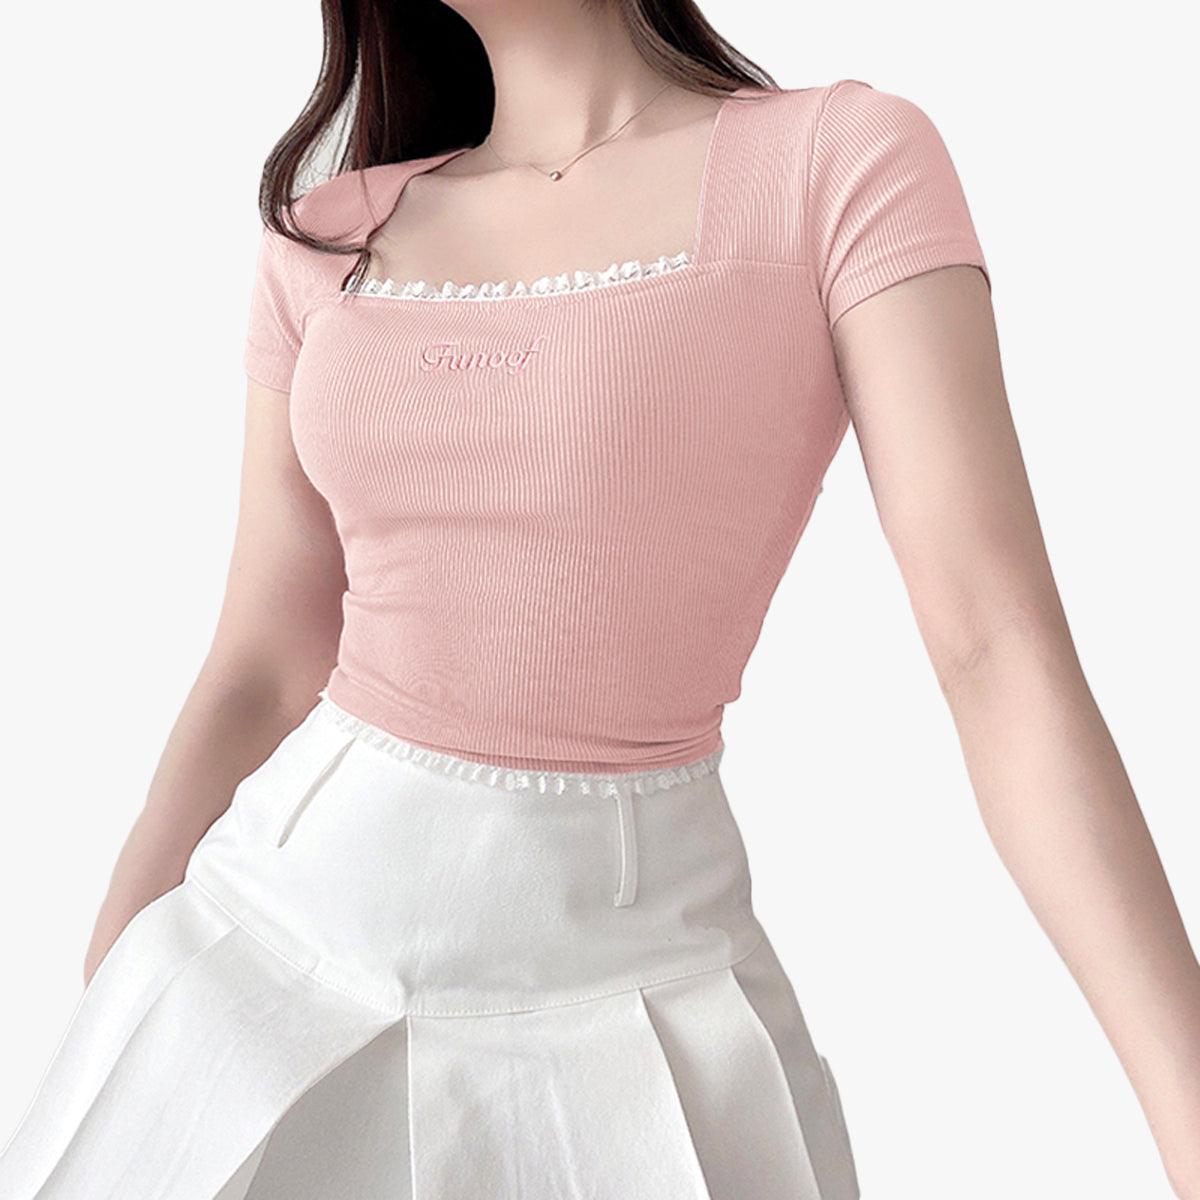 Pastel Pink Soft Girl Crop Top • Aesthetic Clothes Shop